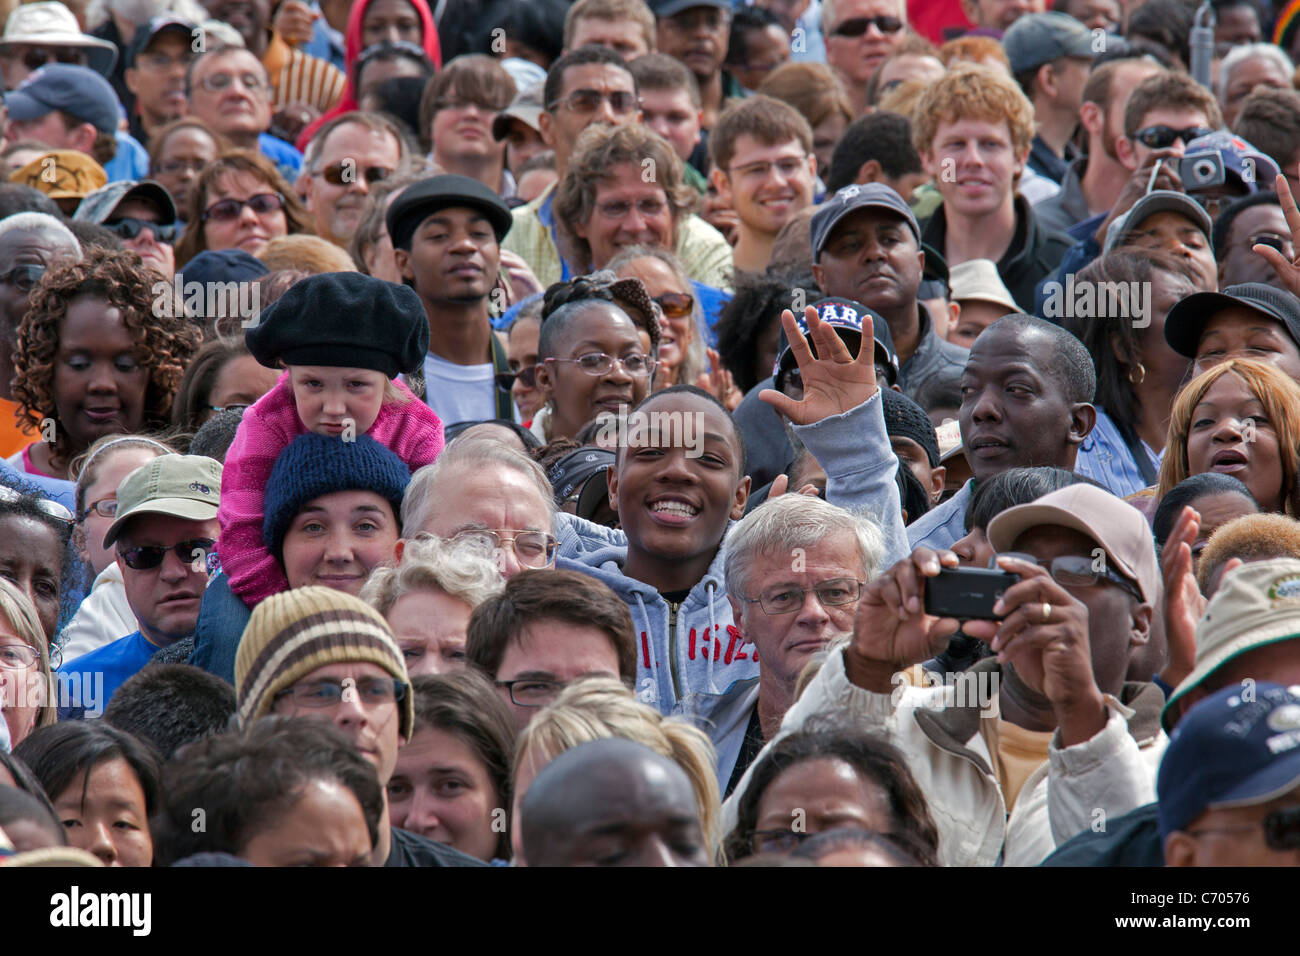 Detroit, Michigan - The crowd at a Labor Day rally waits to hear a speech by President Barack Obama. Stock Photo